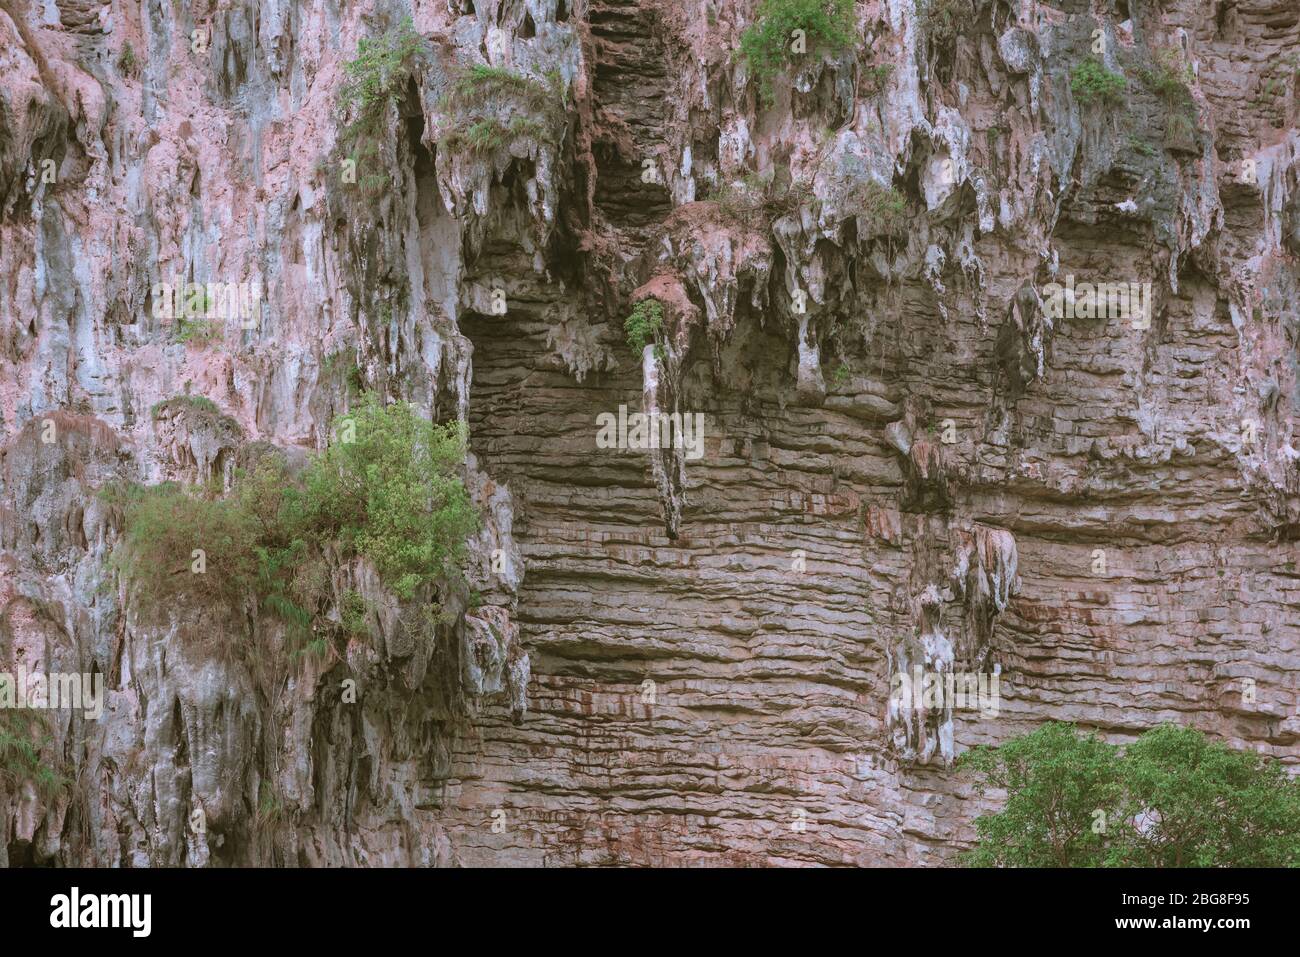 Cliff wall covered with green foliage Stock Photo